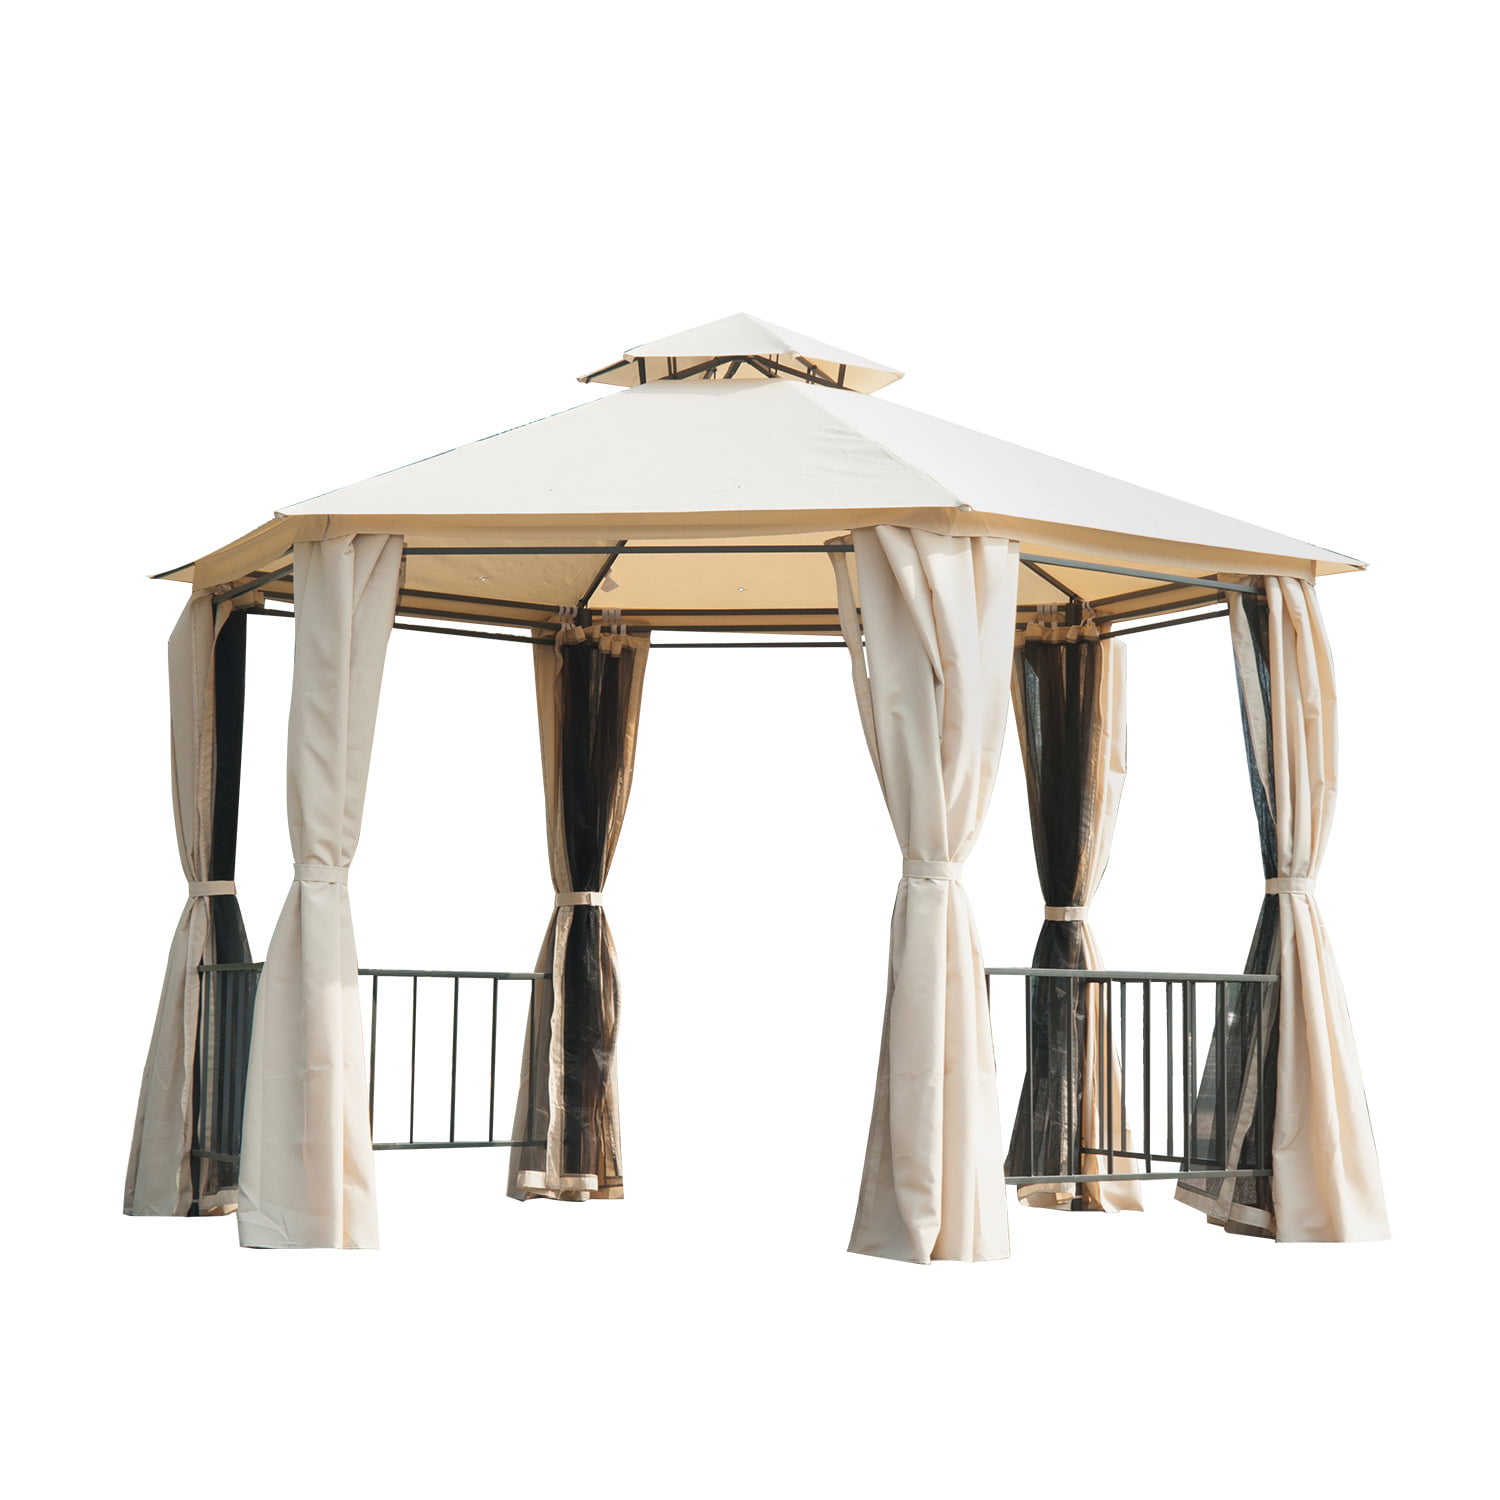 Outsunny 2 Tiered Outdoor Hexagon Garden Gazebo With Removable Curtains